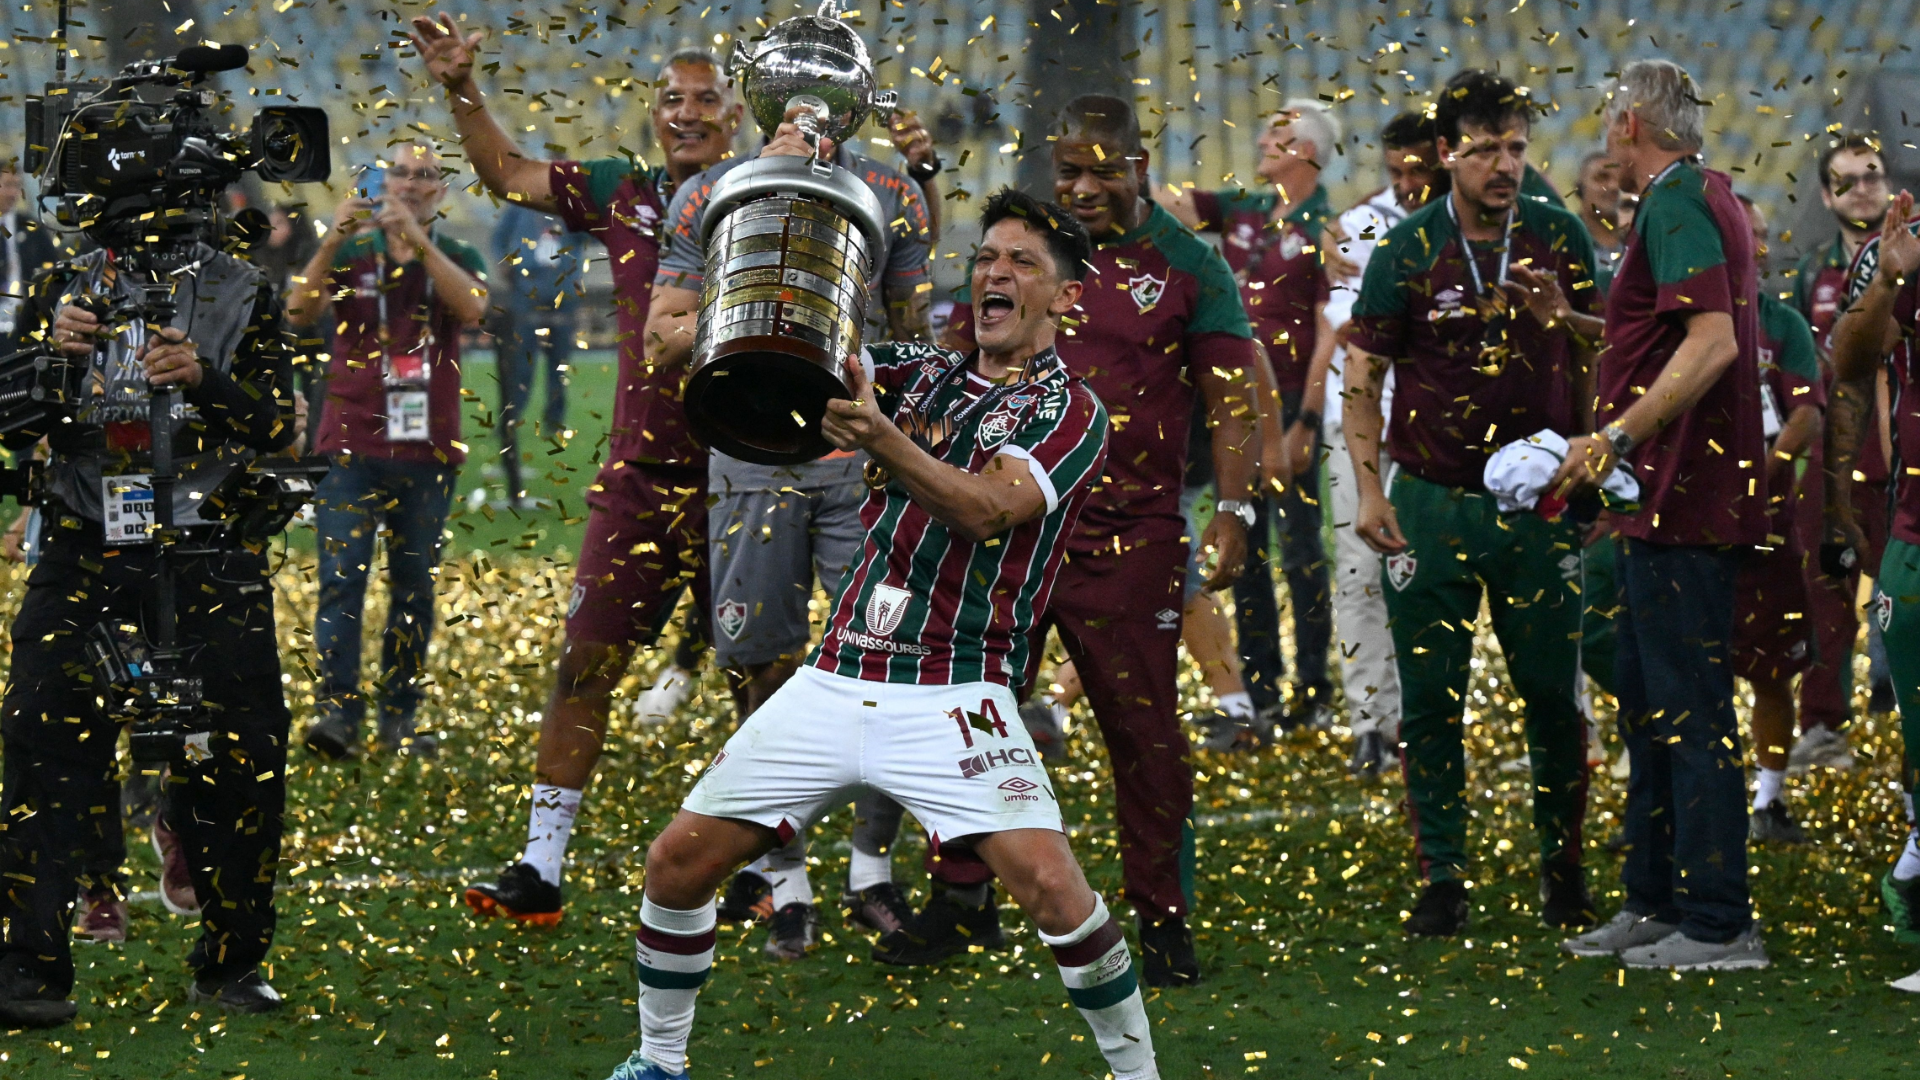 Which international tournament is tougher: Copa Libertadores or